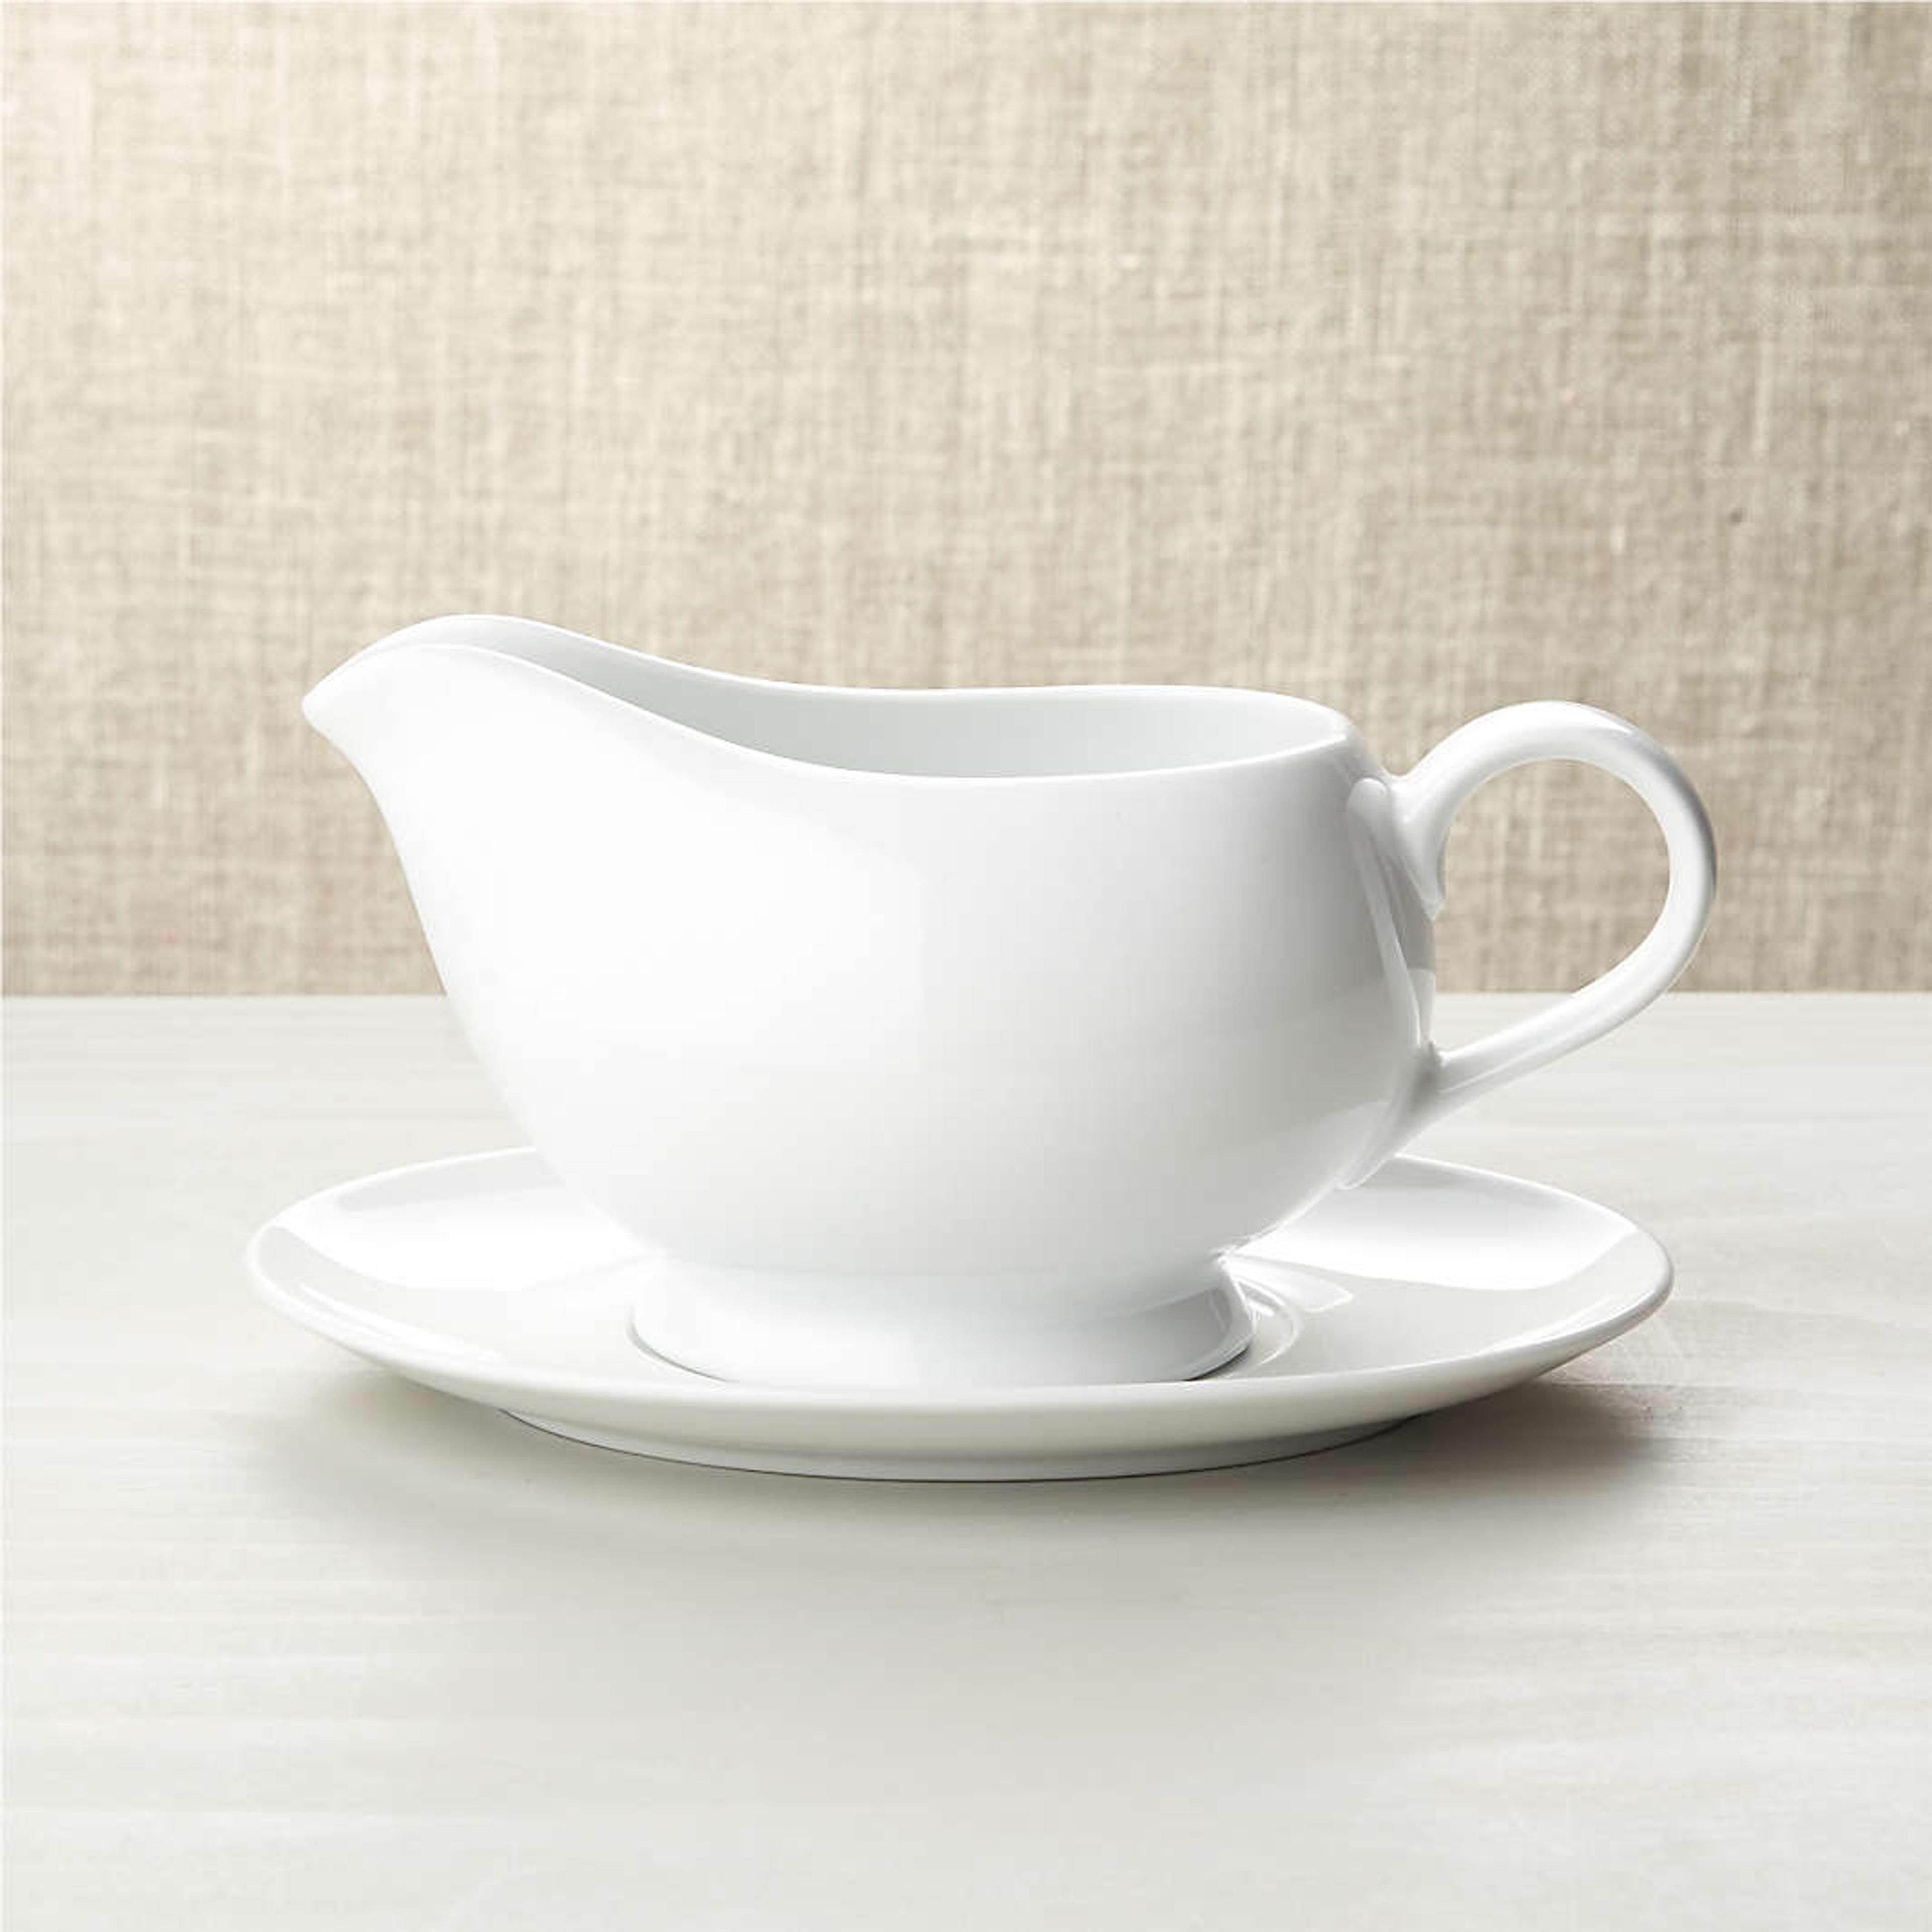 Gravy Boat with Saucer + Reviews | Crate & Barrel